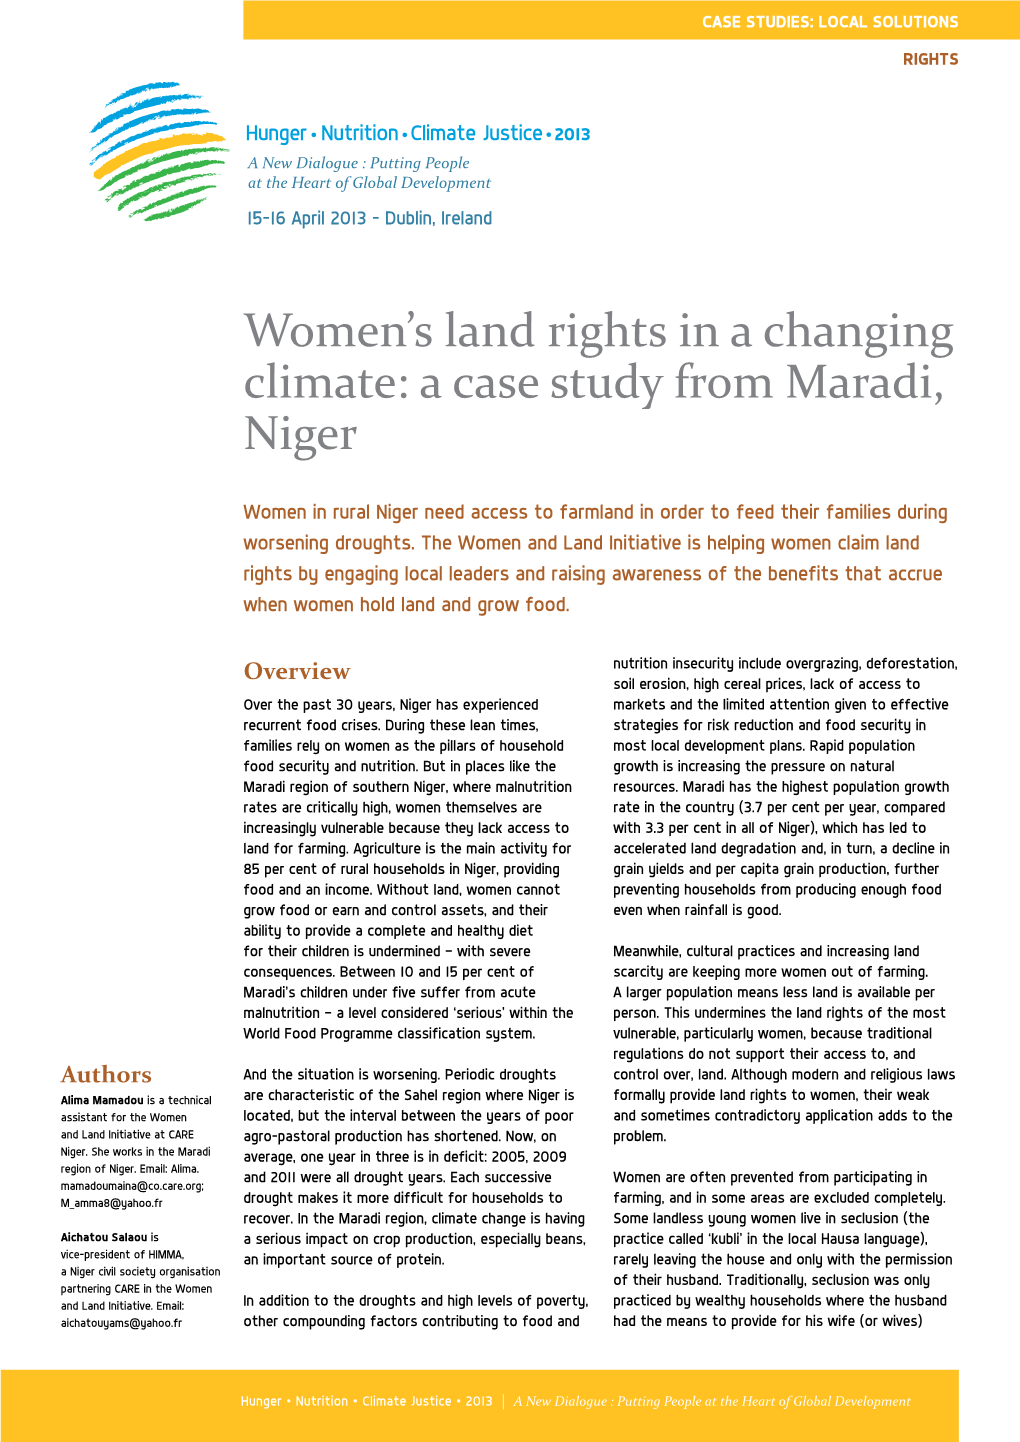 A Case Study from Maradi, Niger